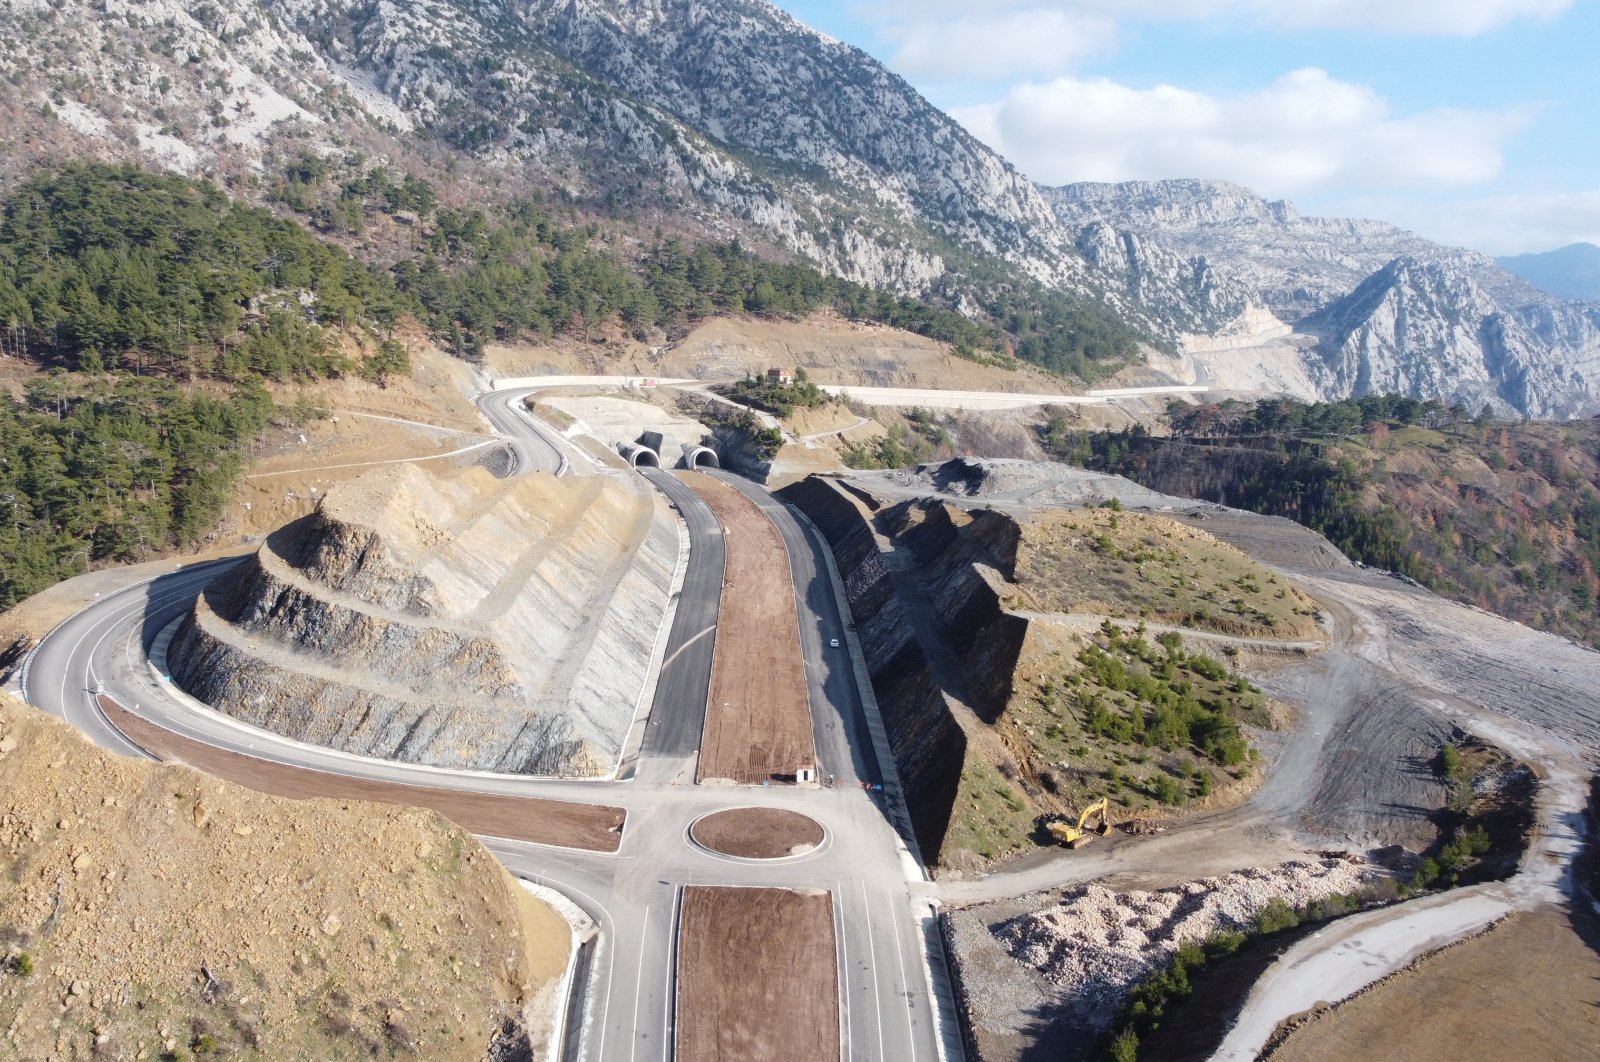 Works on the tunnel that is set to connect the Turkish cities of Konya and Antalya nears completion, at Akdağ Mountains, Türkiye, Jan. 24, 2023. (AA Photo)